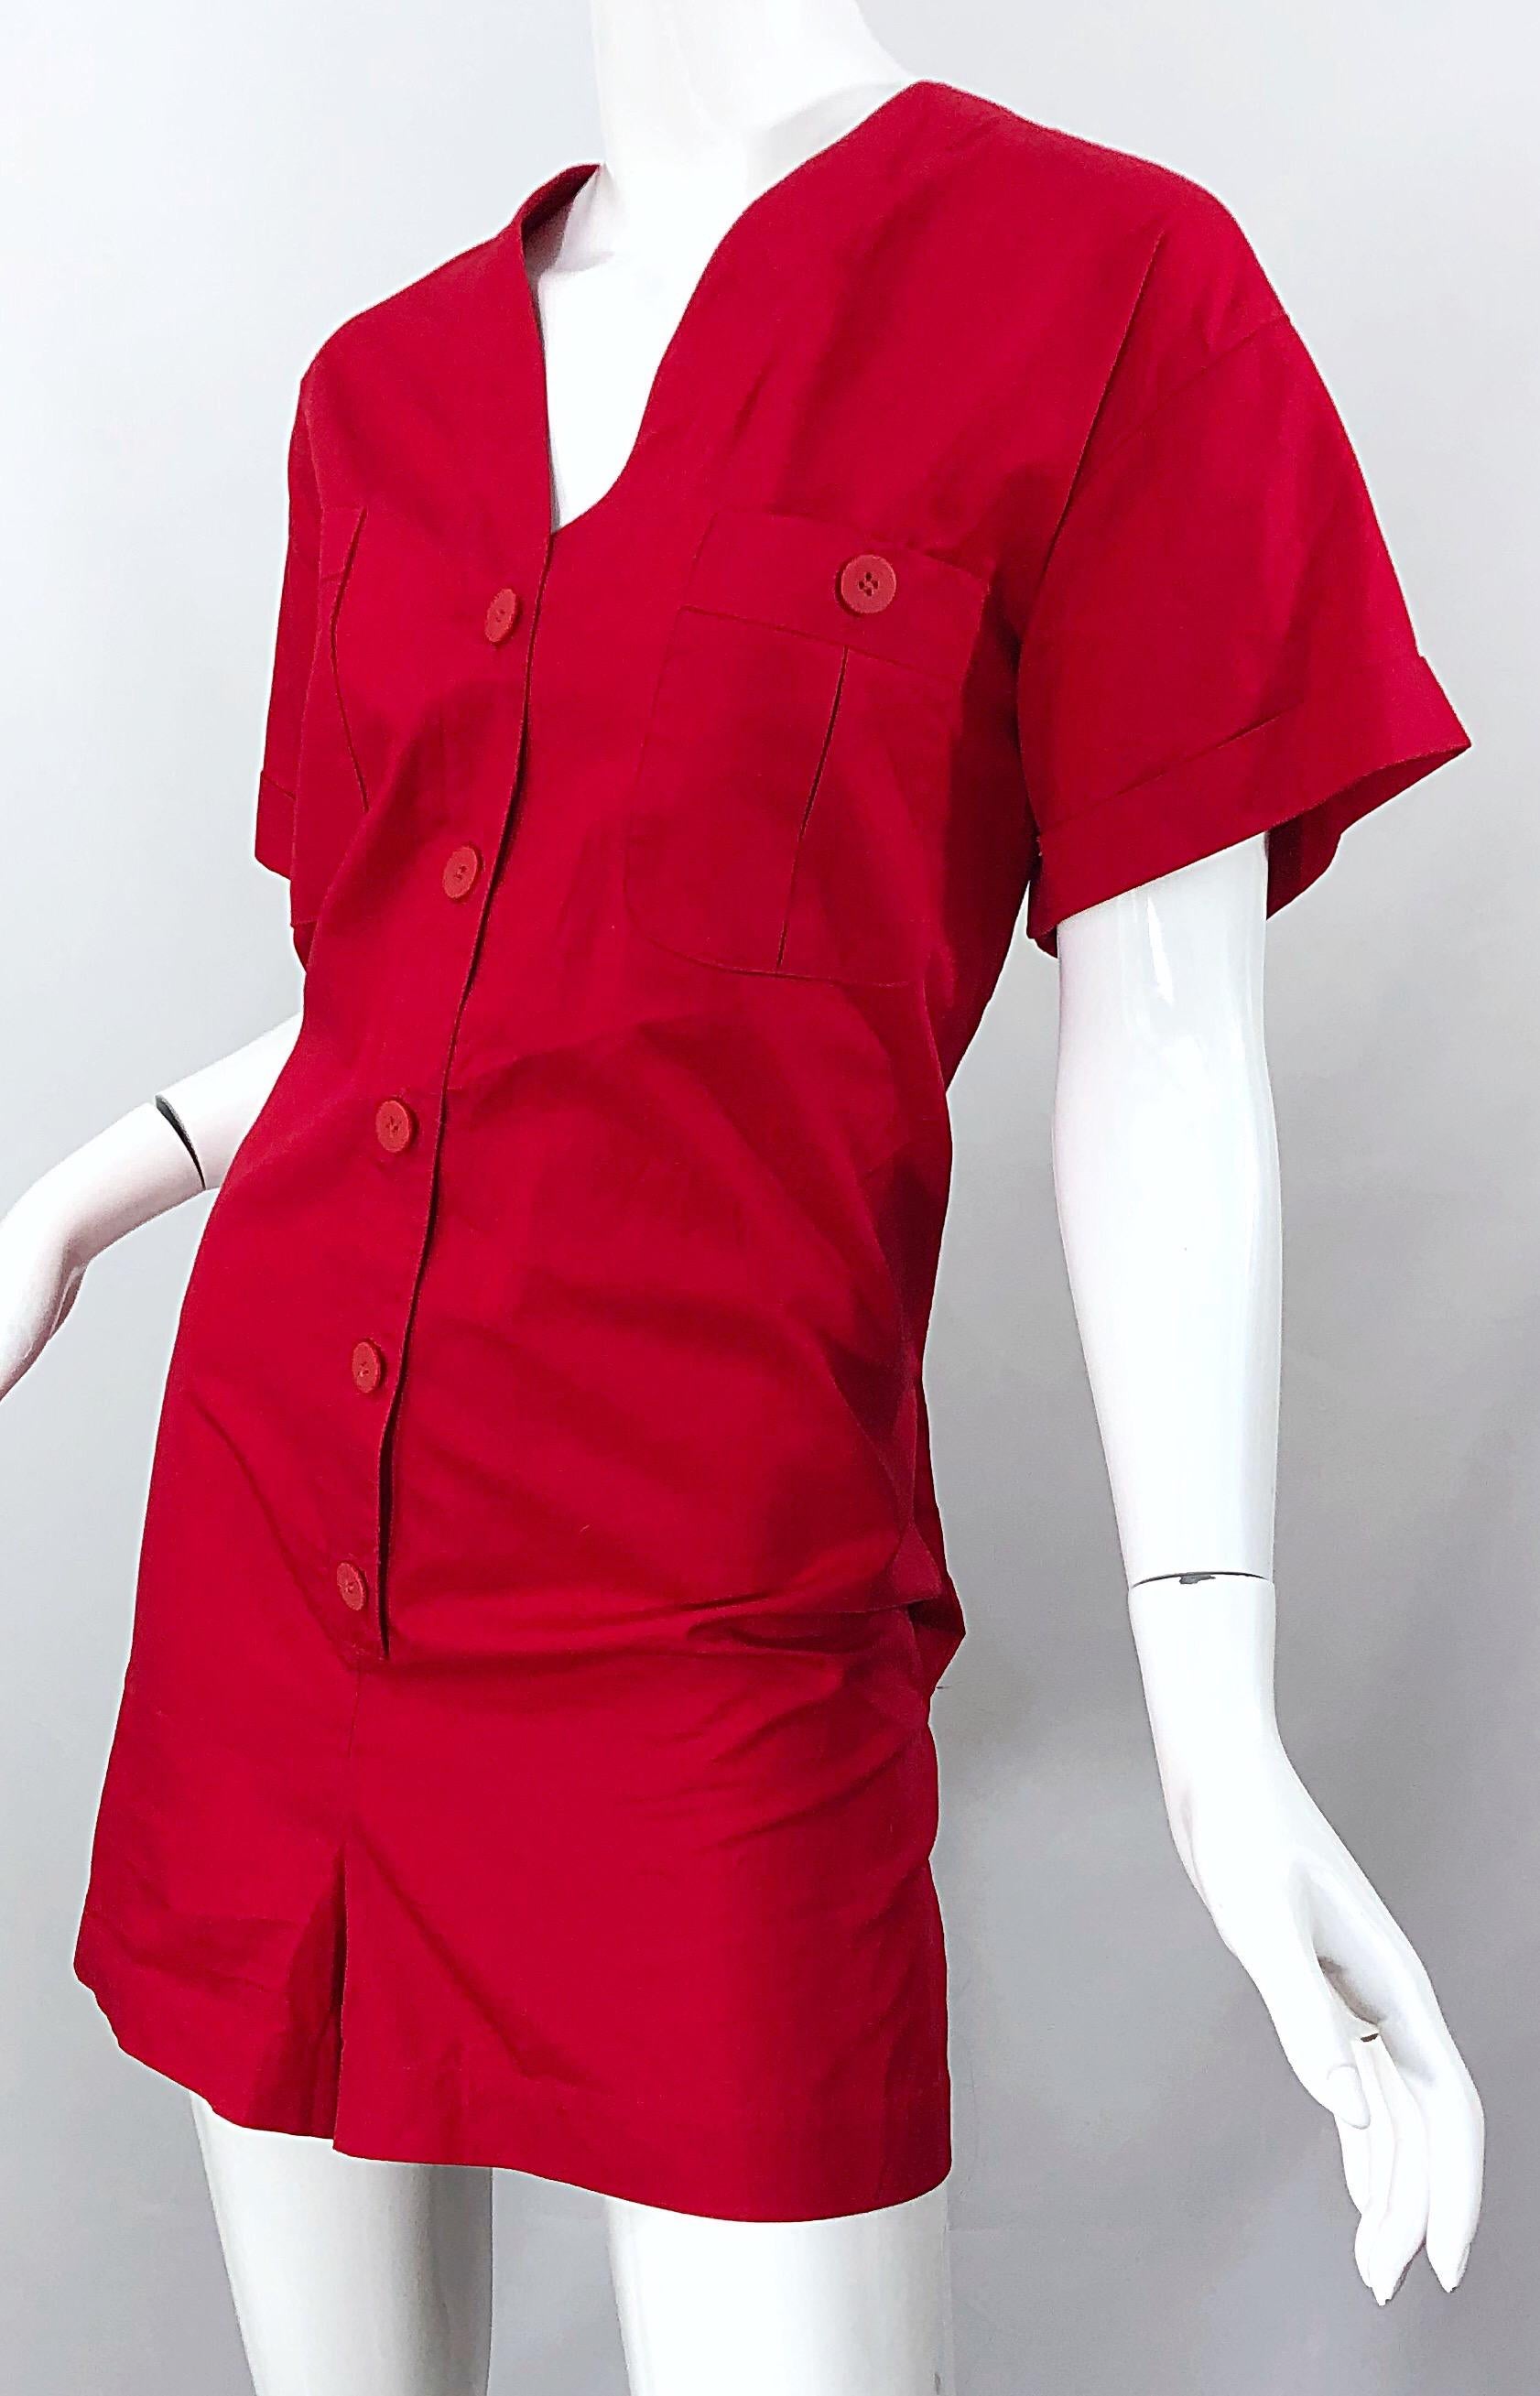 NWT Vintage Christian Dior Romper Size 14 Lipstick Red Cotton One Piece Jumpsuit For Sale 1